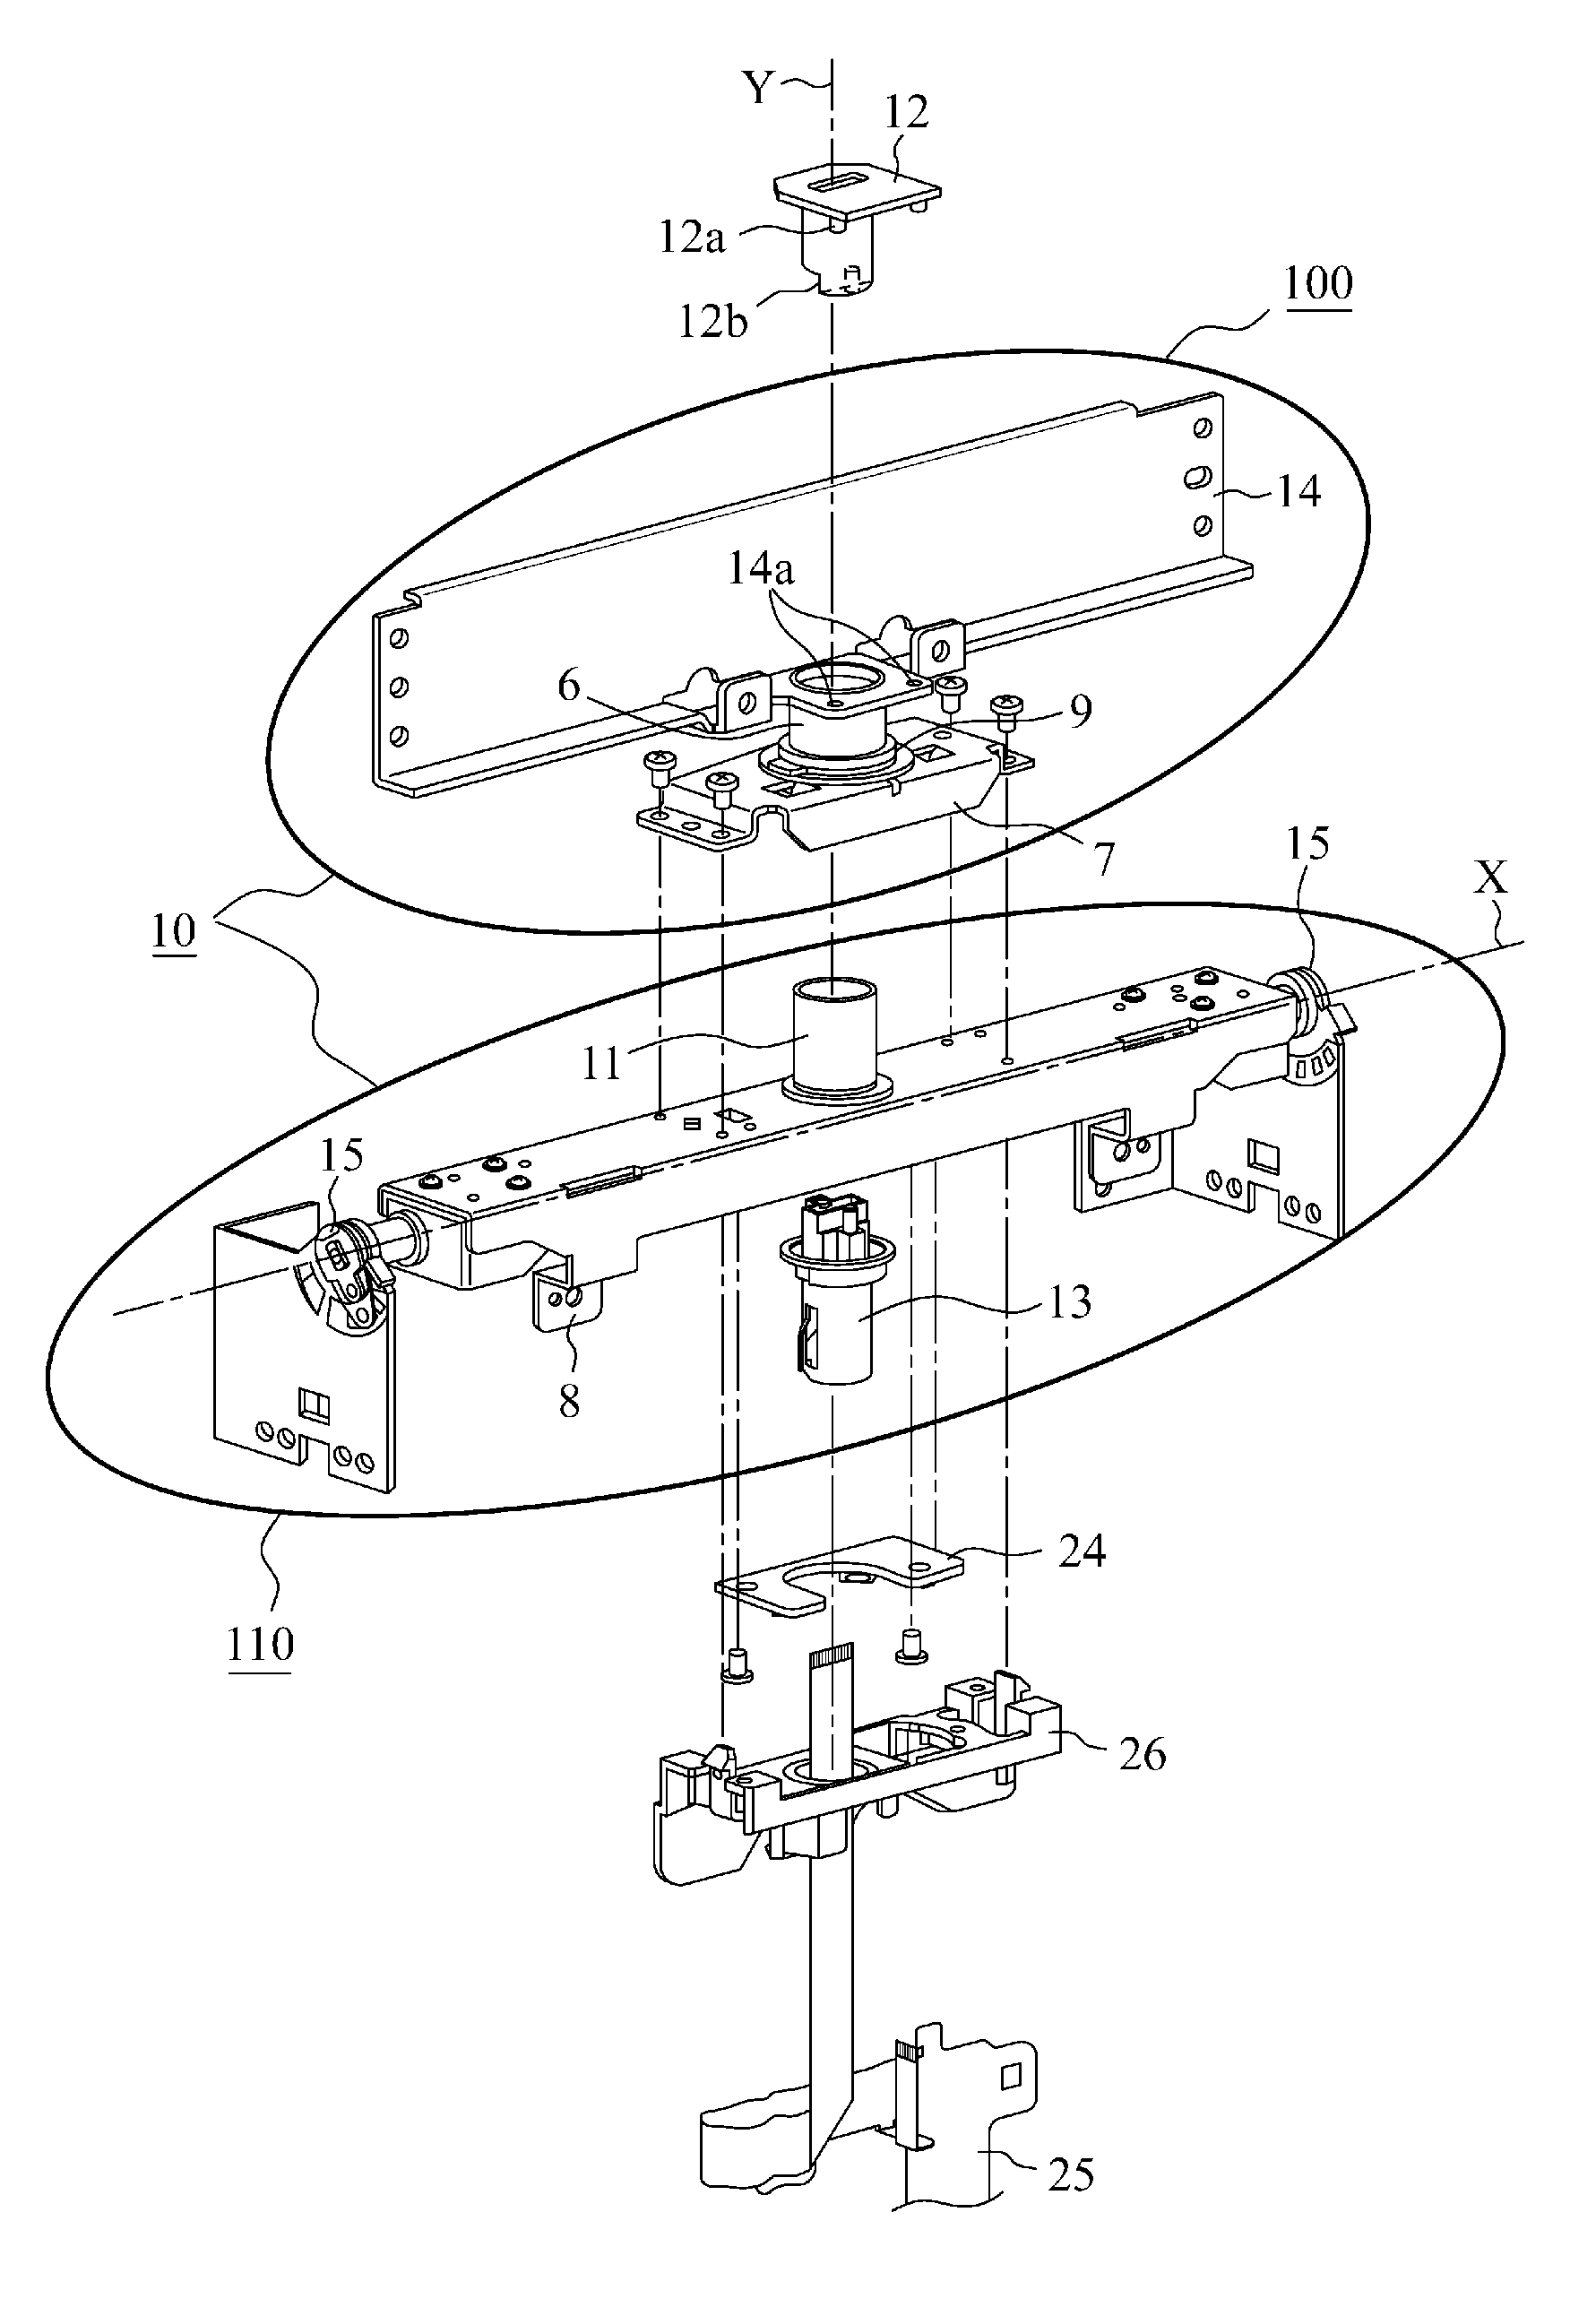 FPC fixing structure for two-axis hinge mechanism